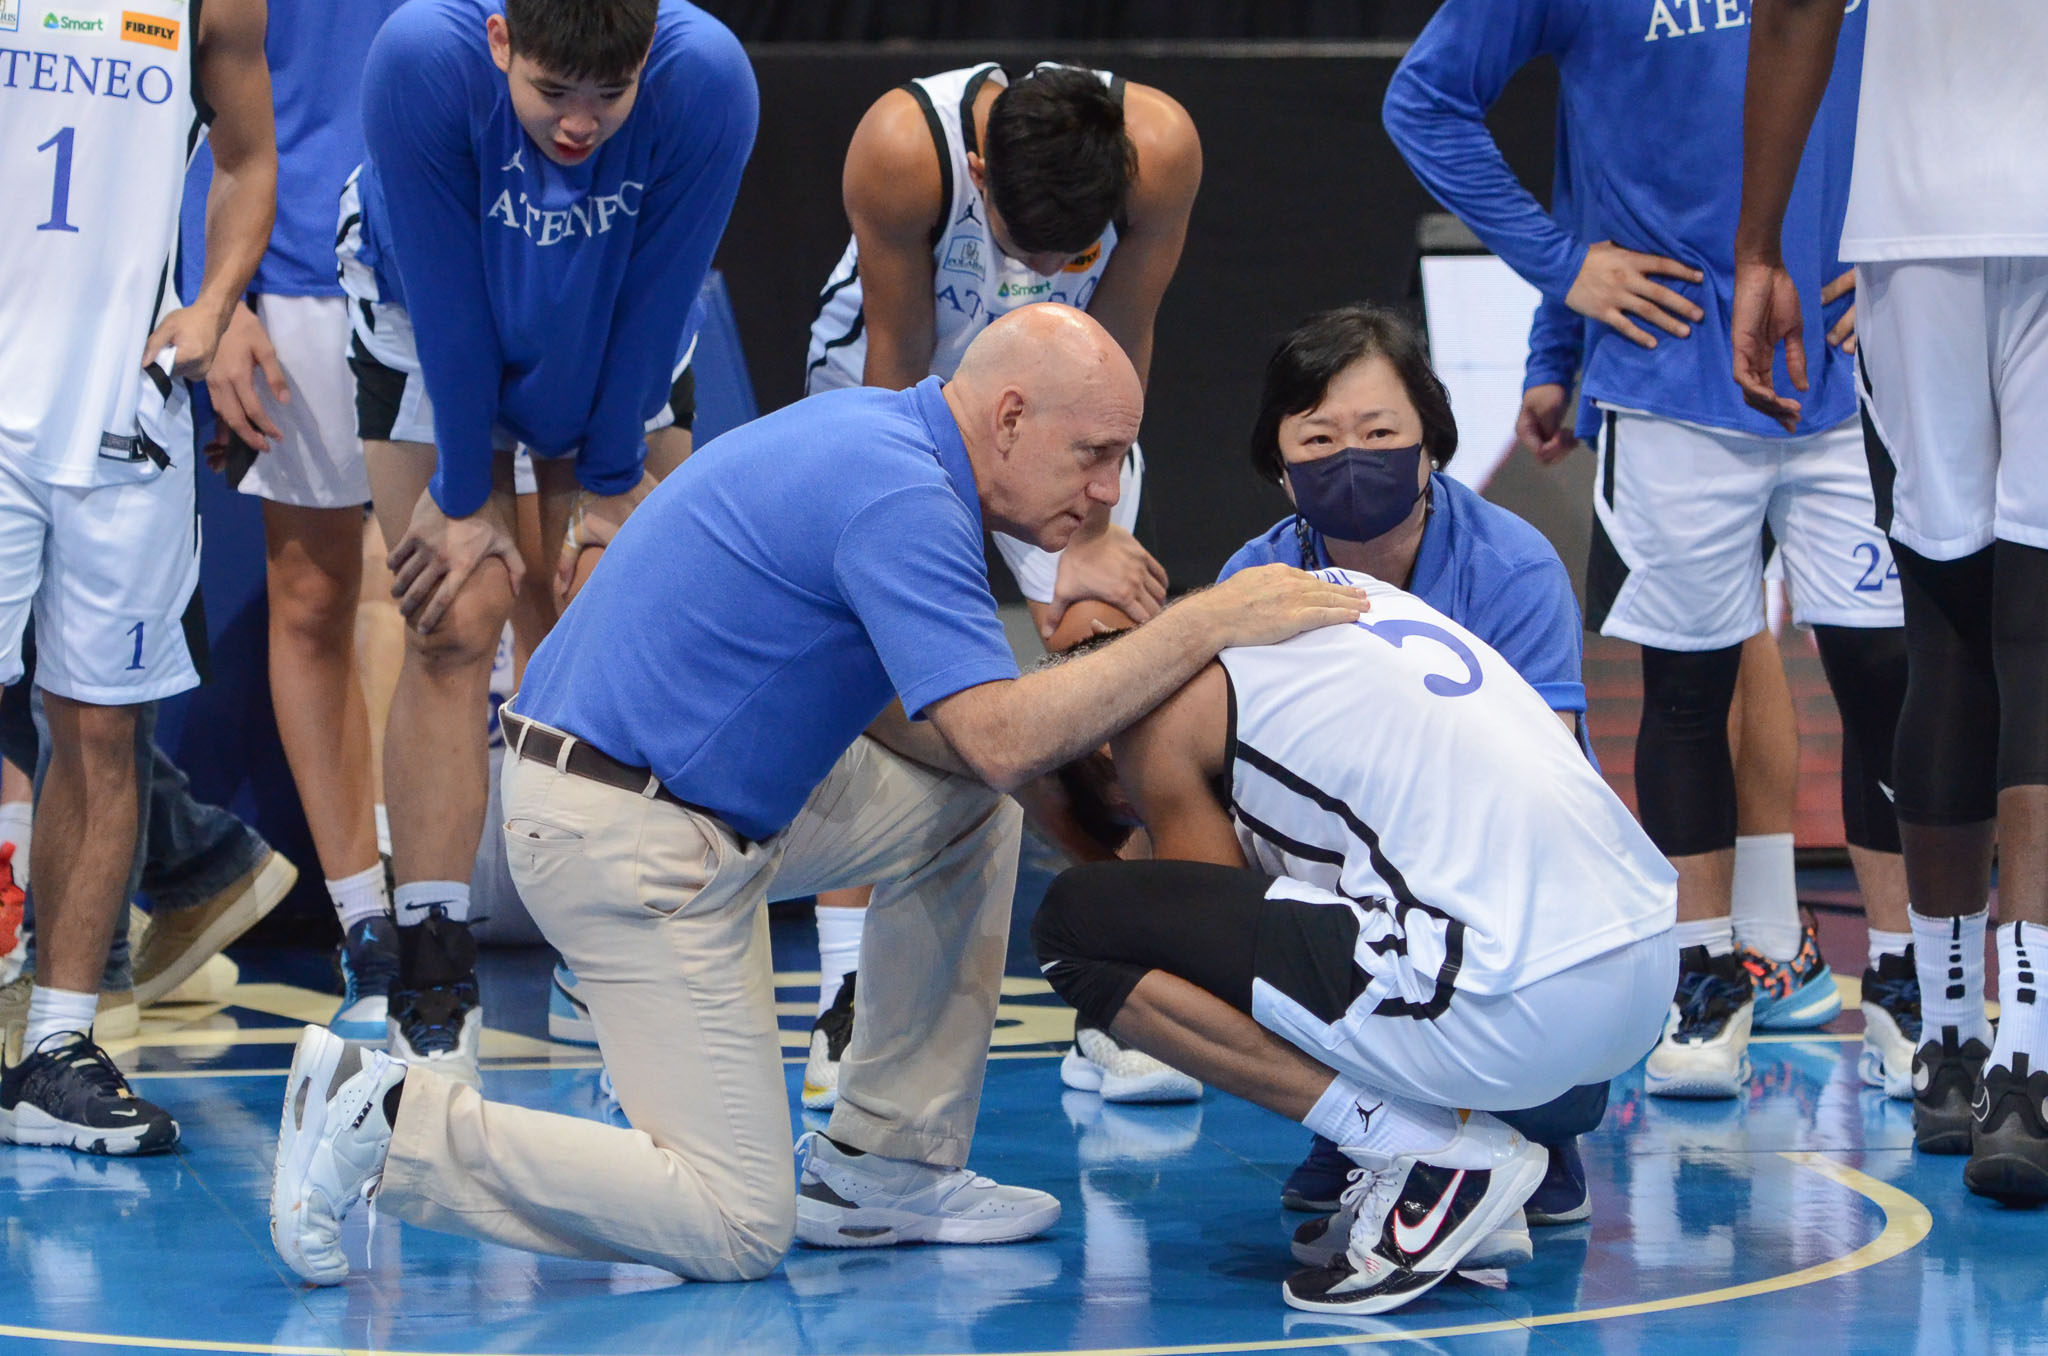 Ateneo coach Tab Baldwin consoling his players after the UAAP Finals loss. UAAP PHOTO